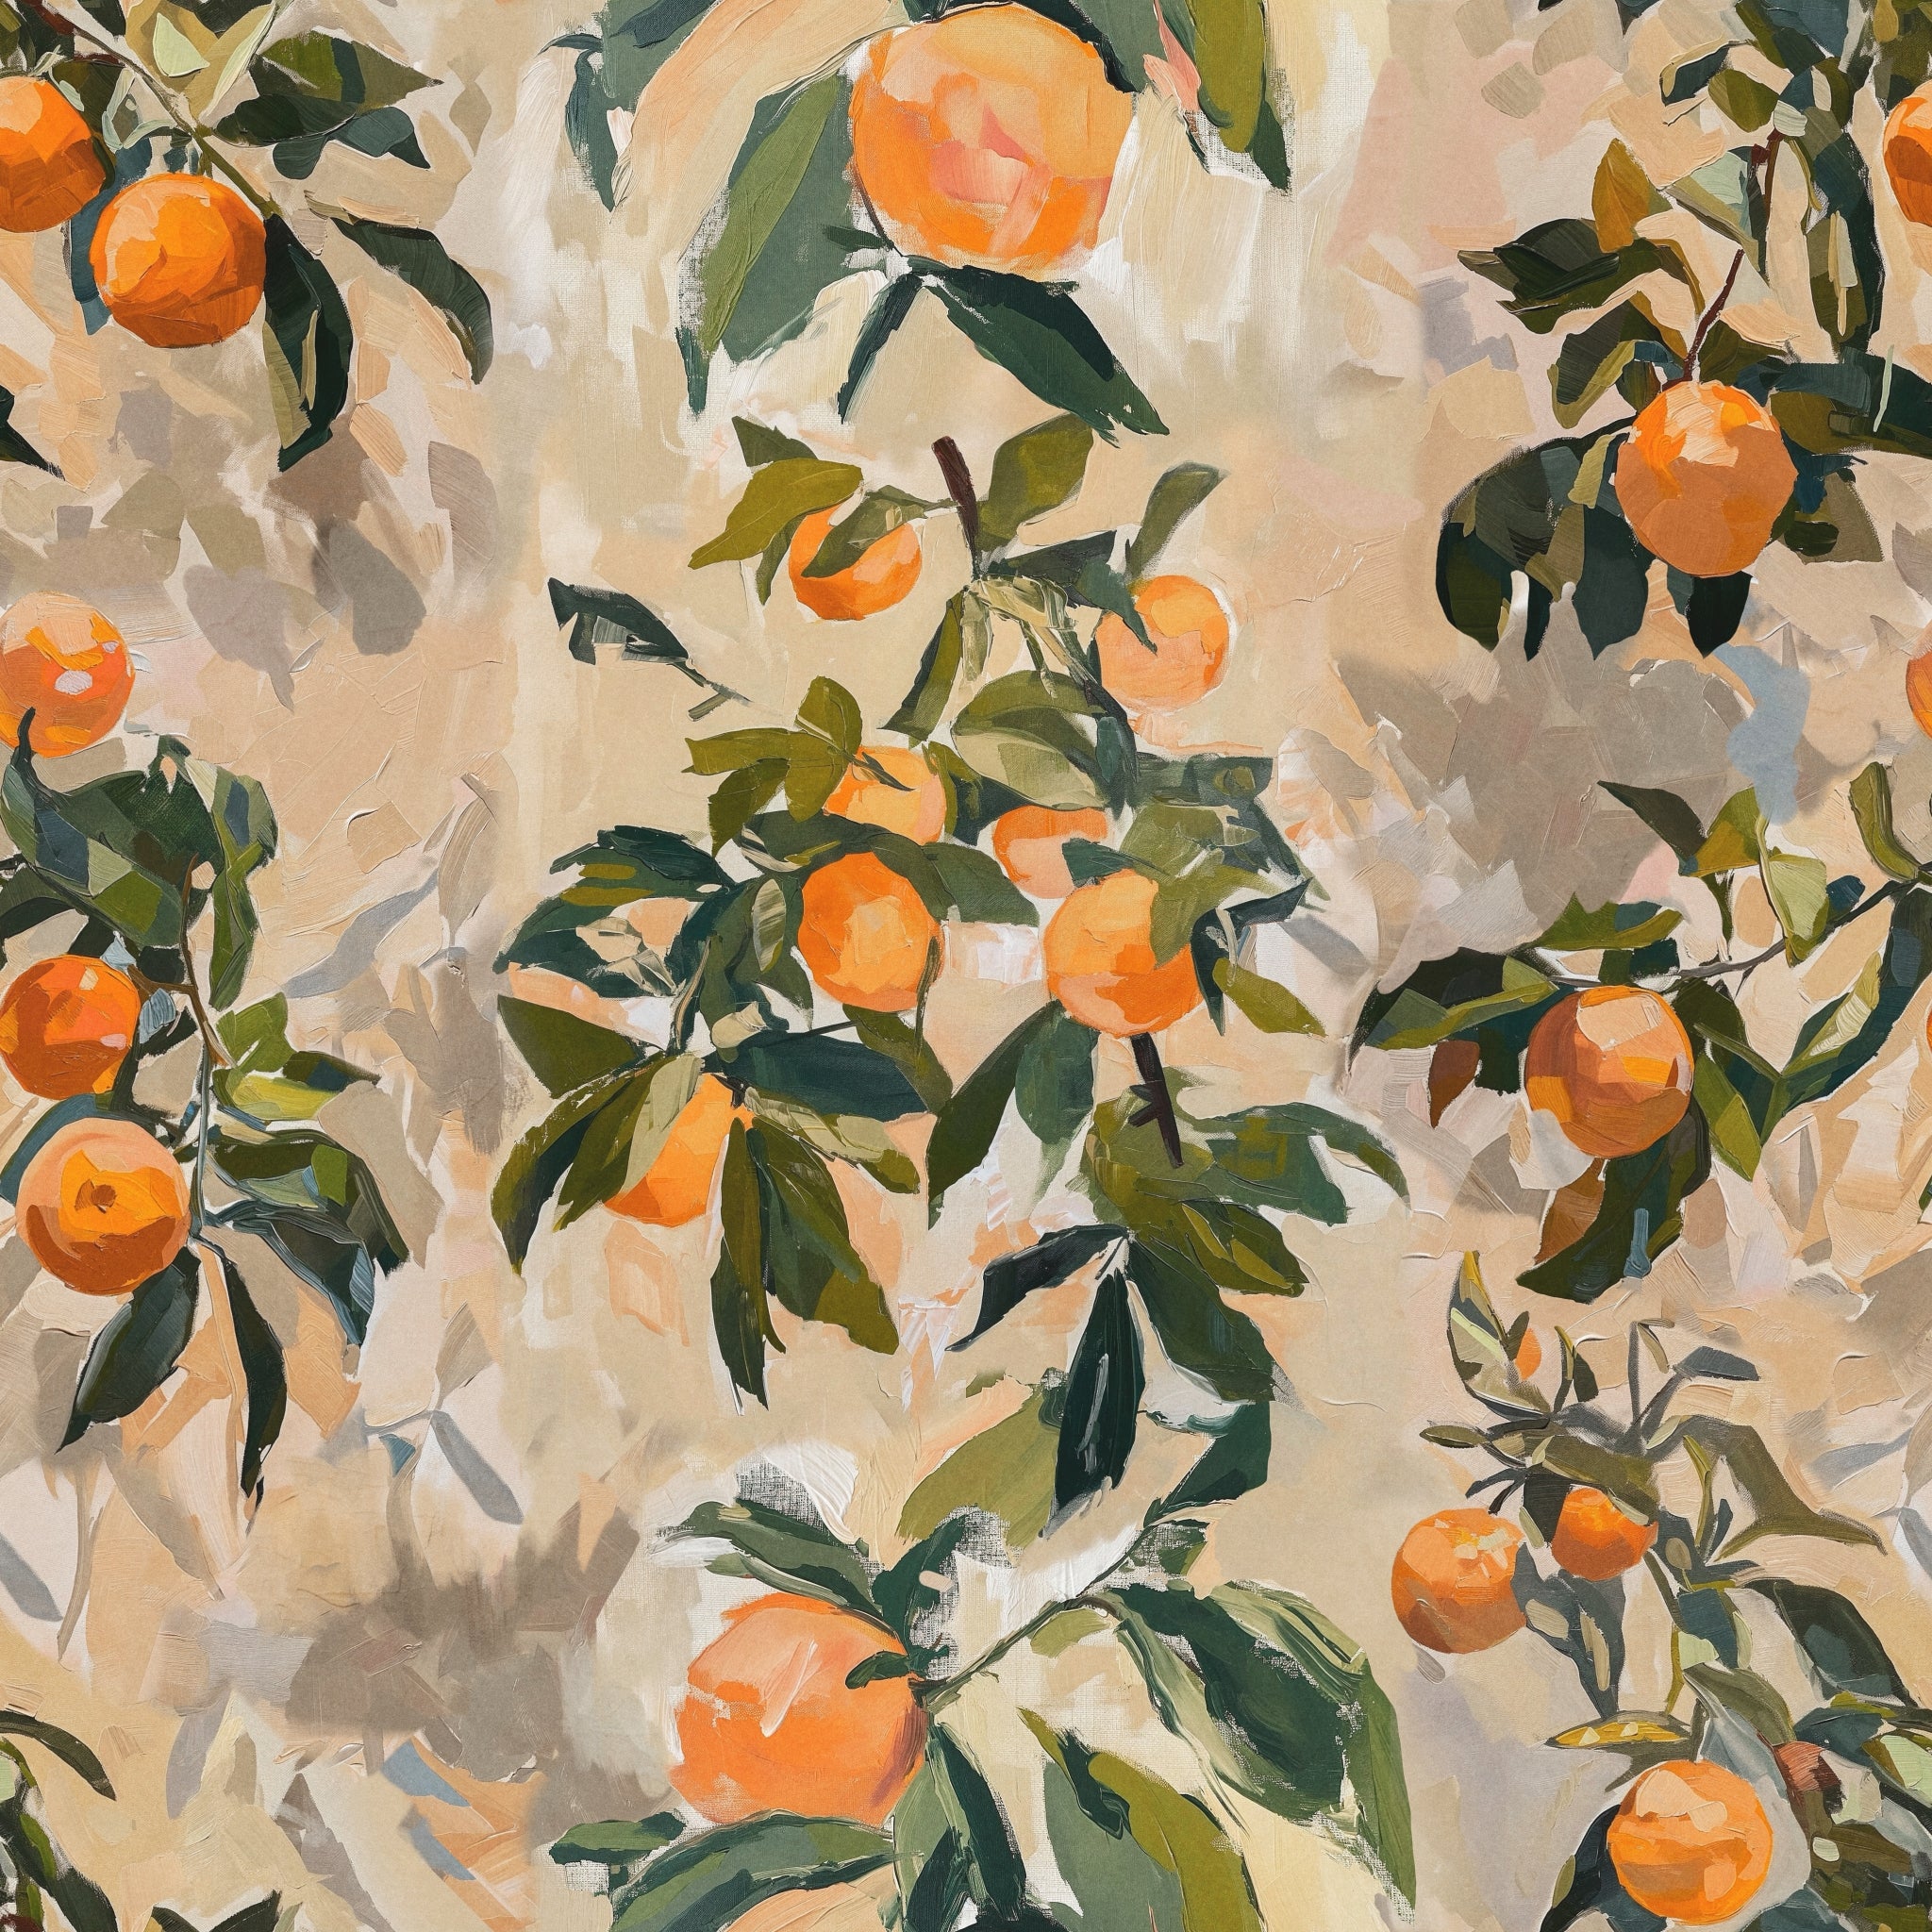 "Clementine Wallpaper by Wall Blush adds a vibrant touch to a room decor with its citrus theme."